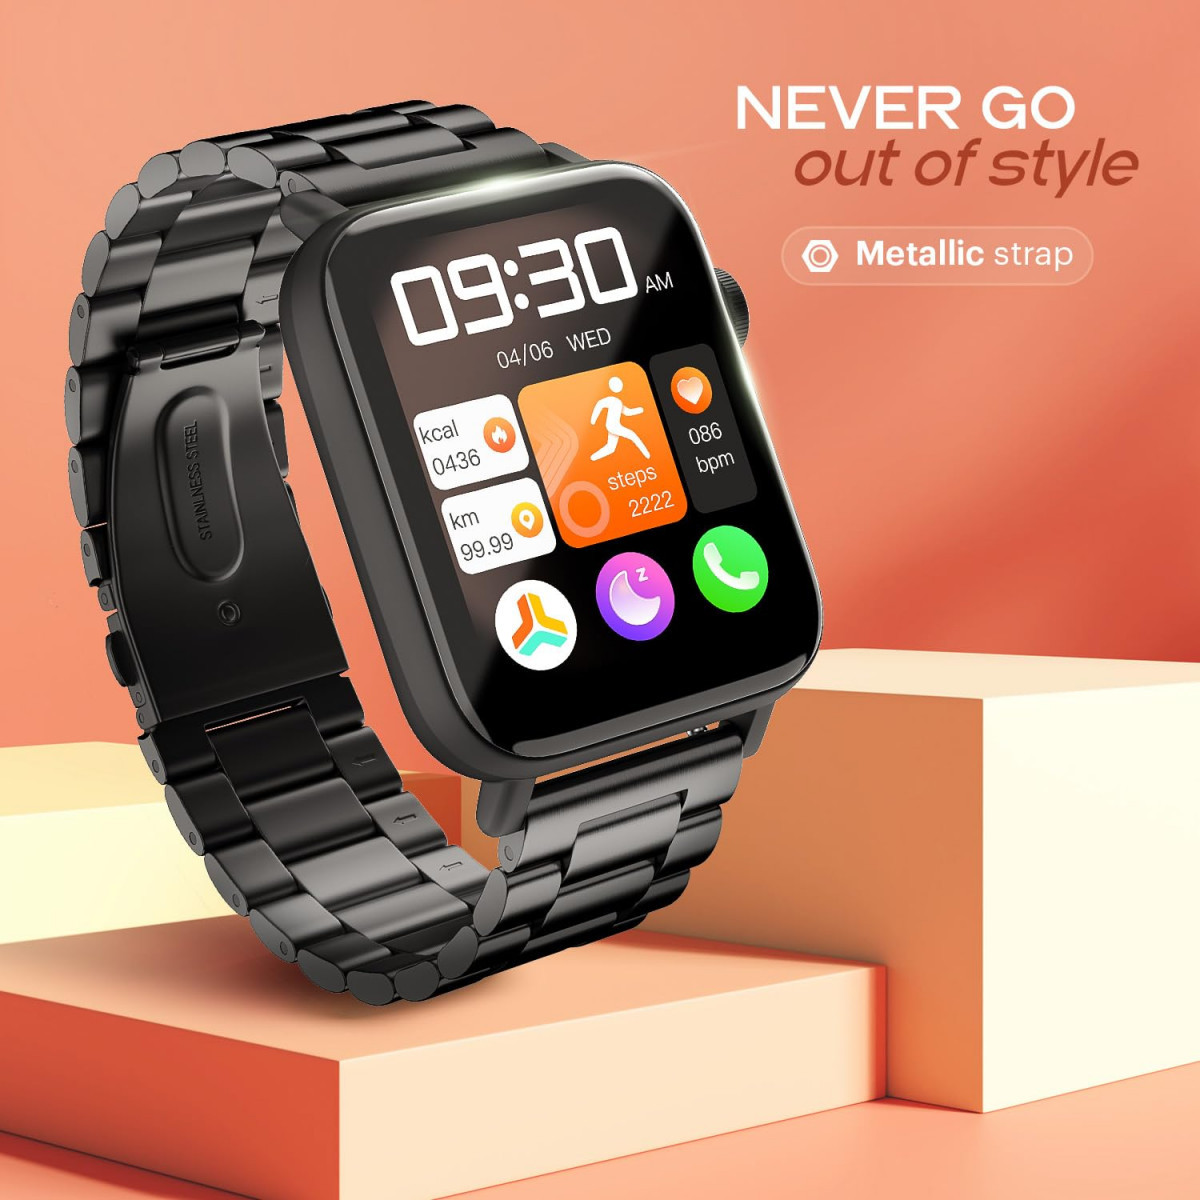 Noise Vivid Call 2 Smart Watch with 185 HD Display BT Calling IP68 Waterproof 7 Days Battery Life Sleep Tracking 150 Watch Faces Elite Black